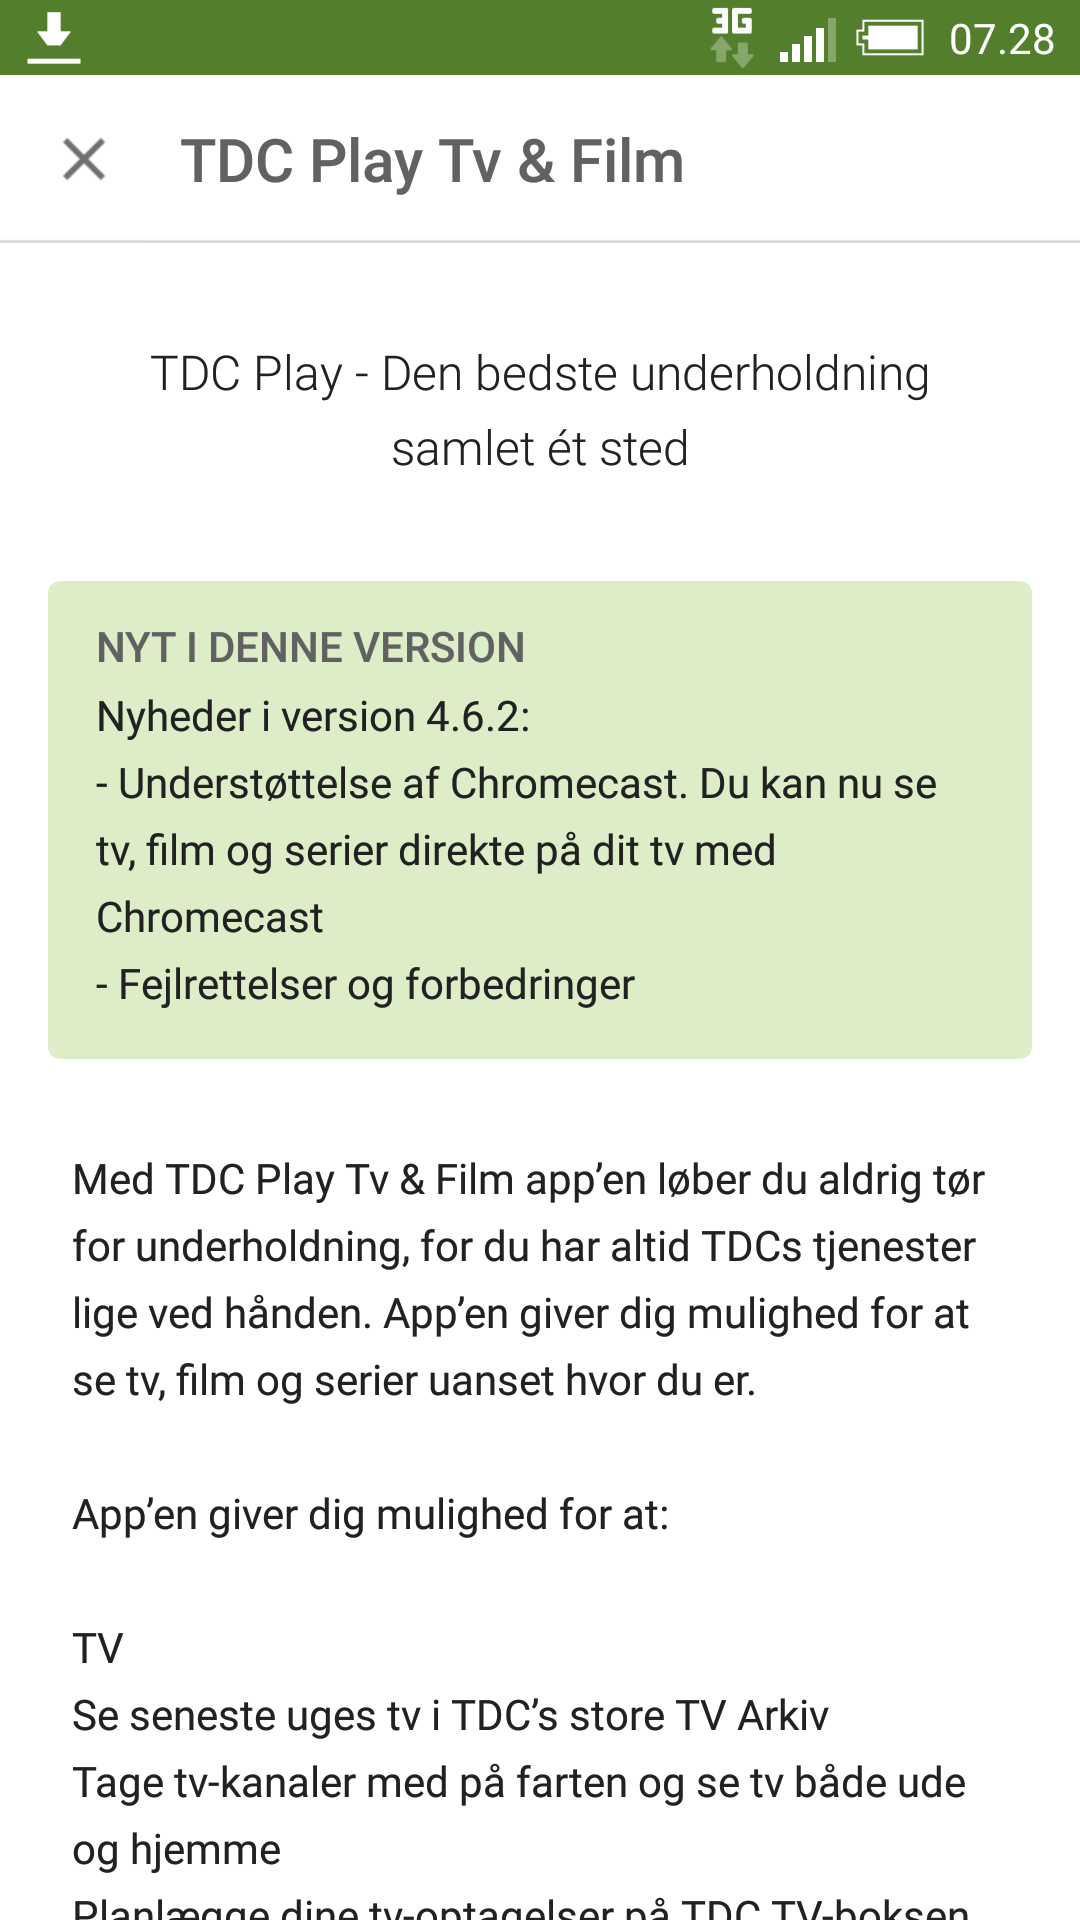 Tdc play support